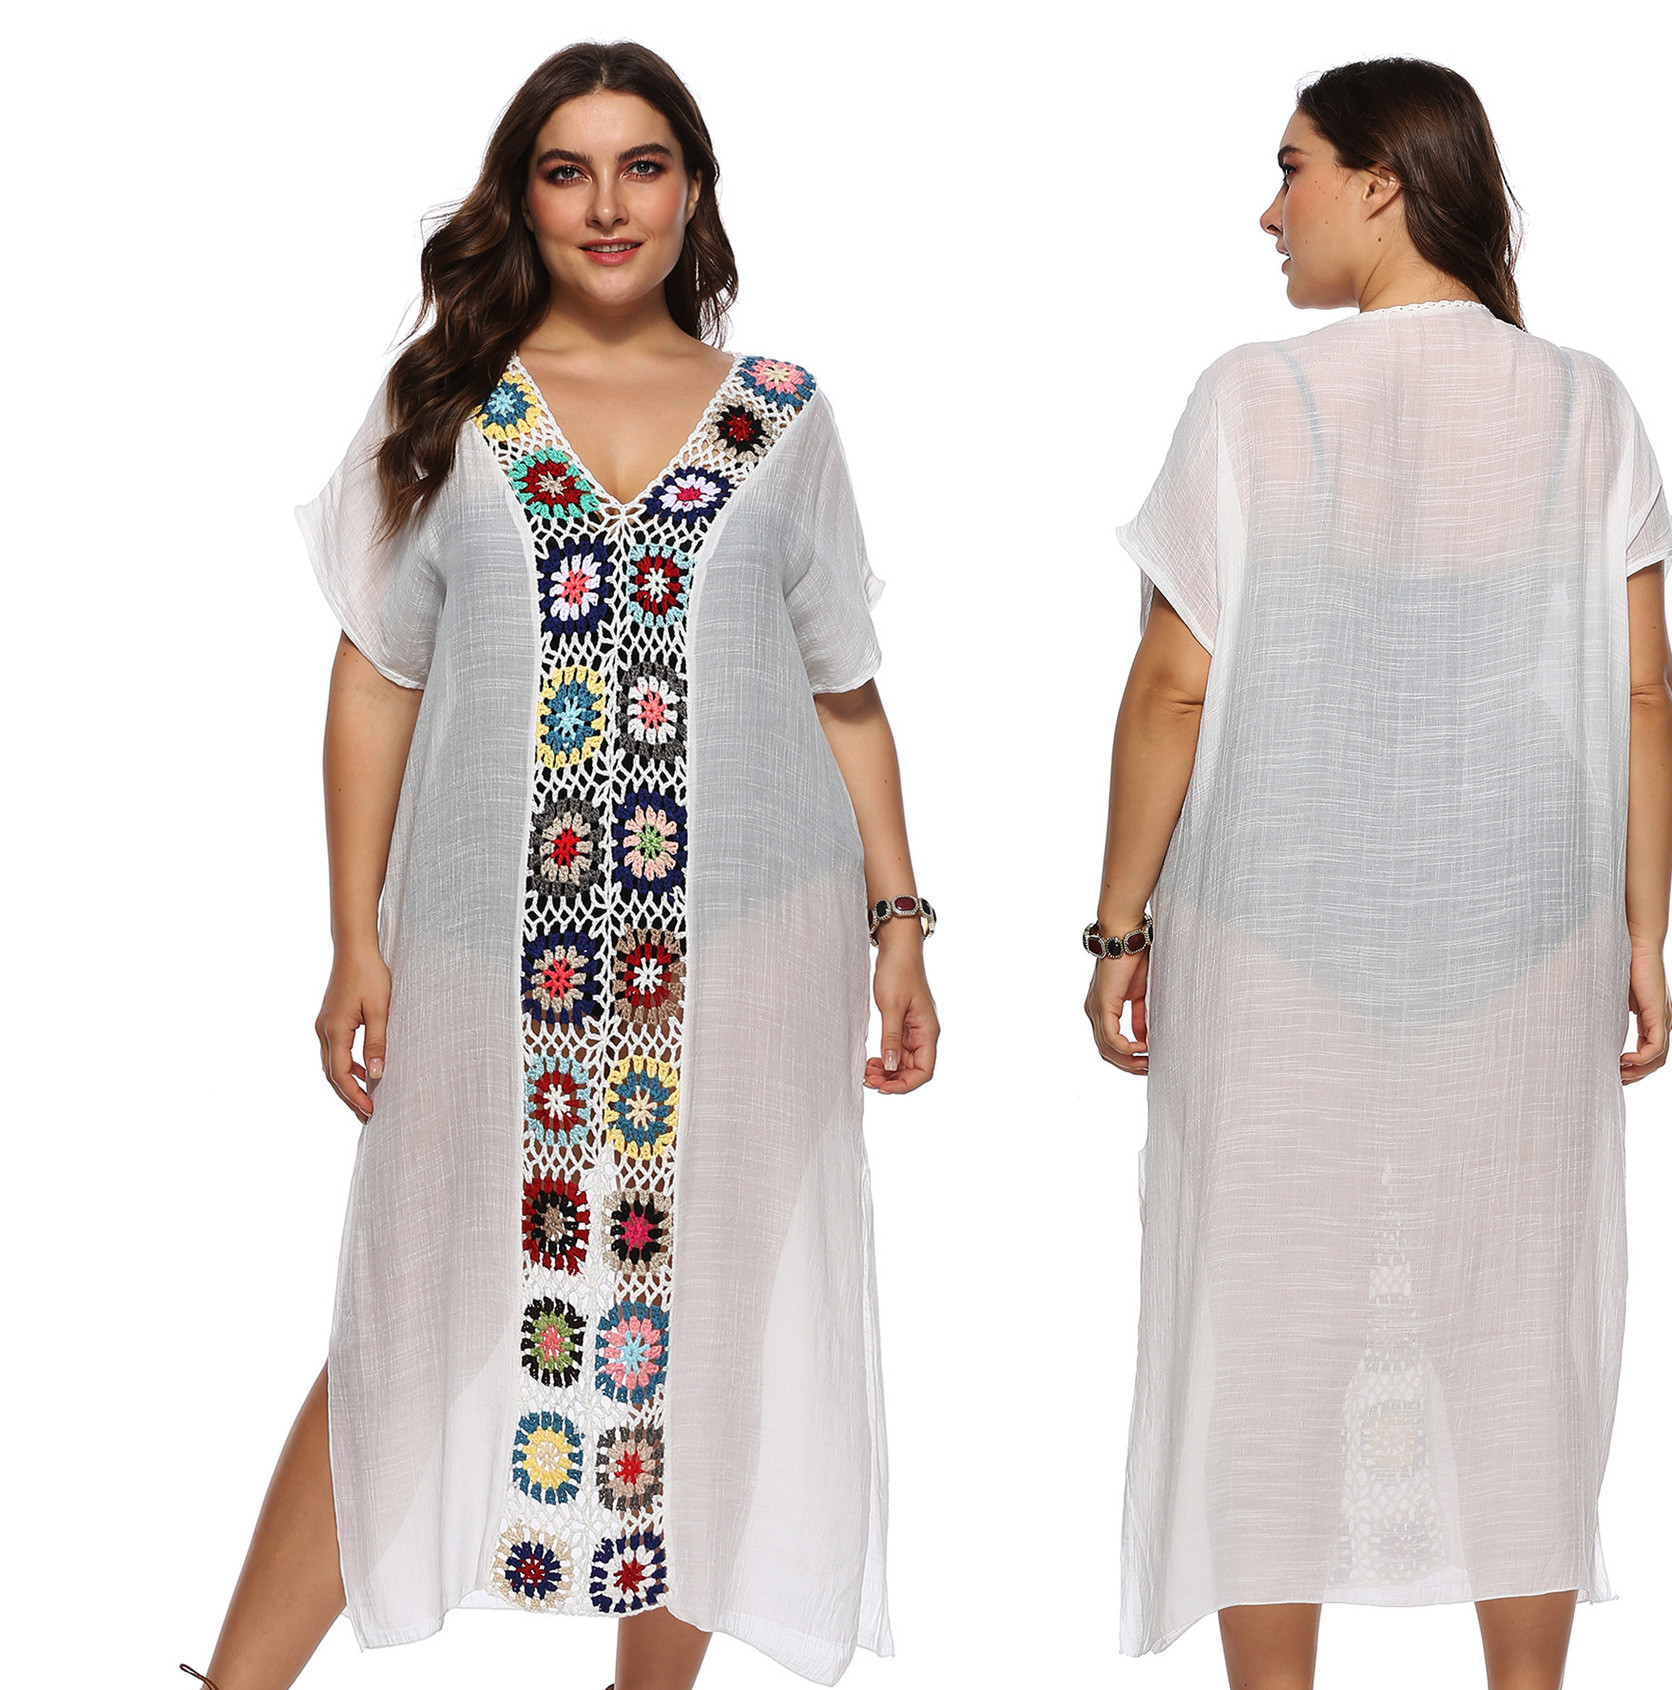 Amazon large size women's clothing cross-border special fat old woman cotton hand-hook patchwork skirt beach smock dress 1900